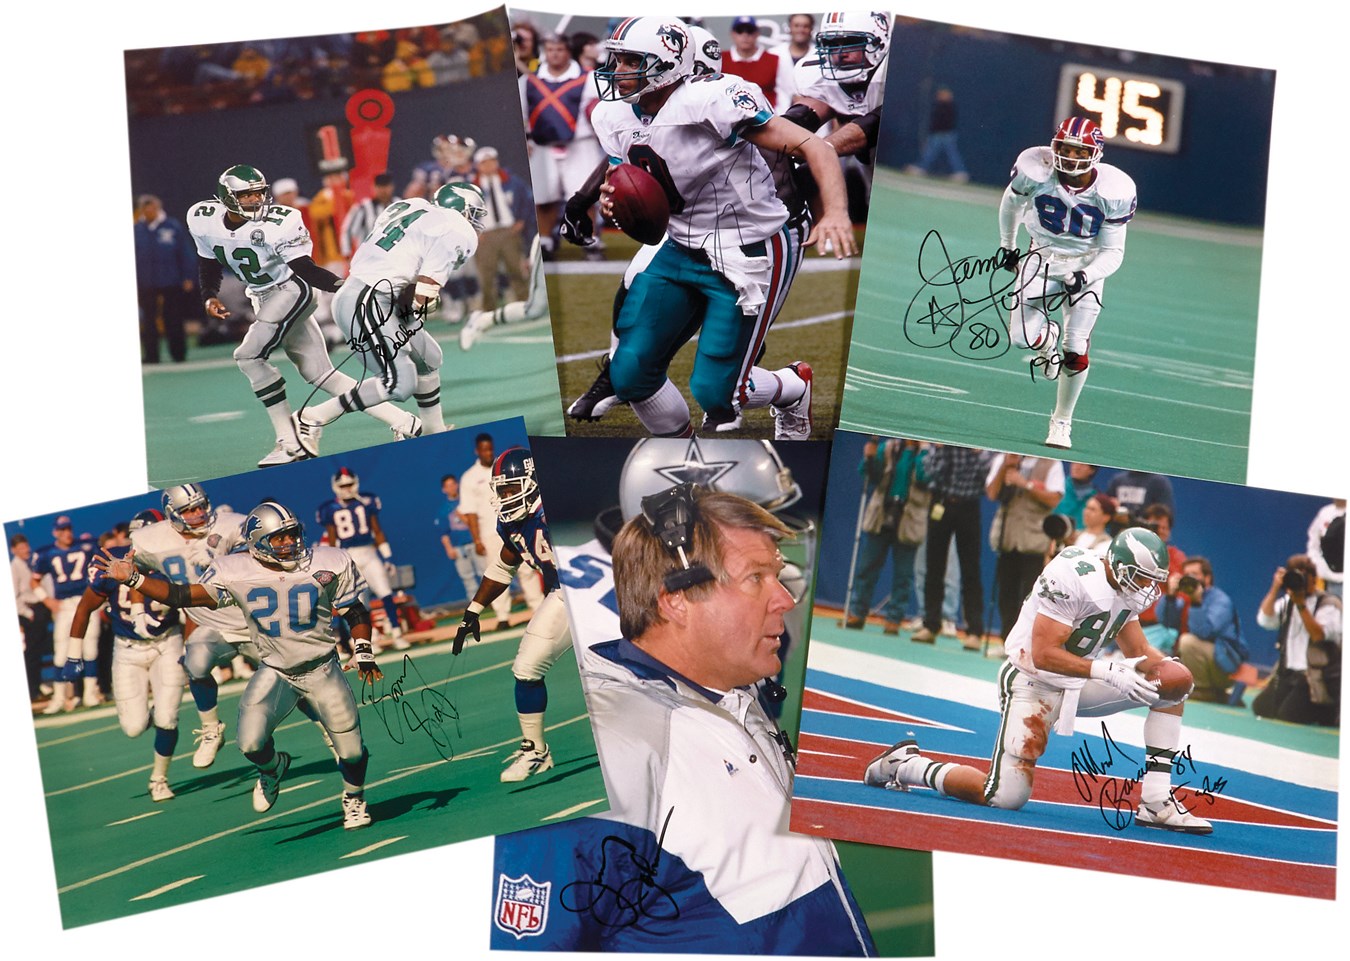 1980s-90s "Superstars of the NFL" 16x20” In Person Signed Photographs from VIP Photographer Richard Brightly (6)